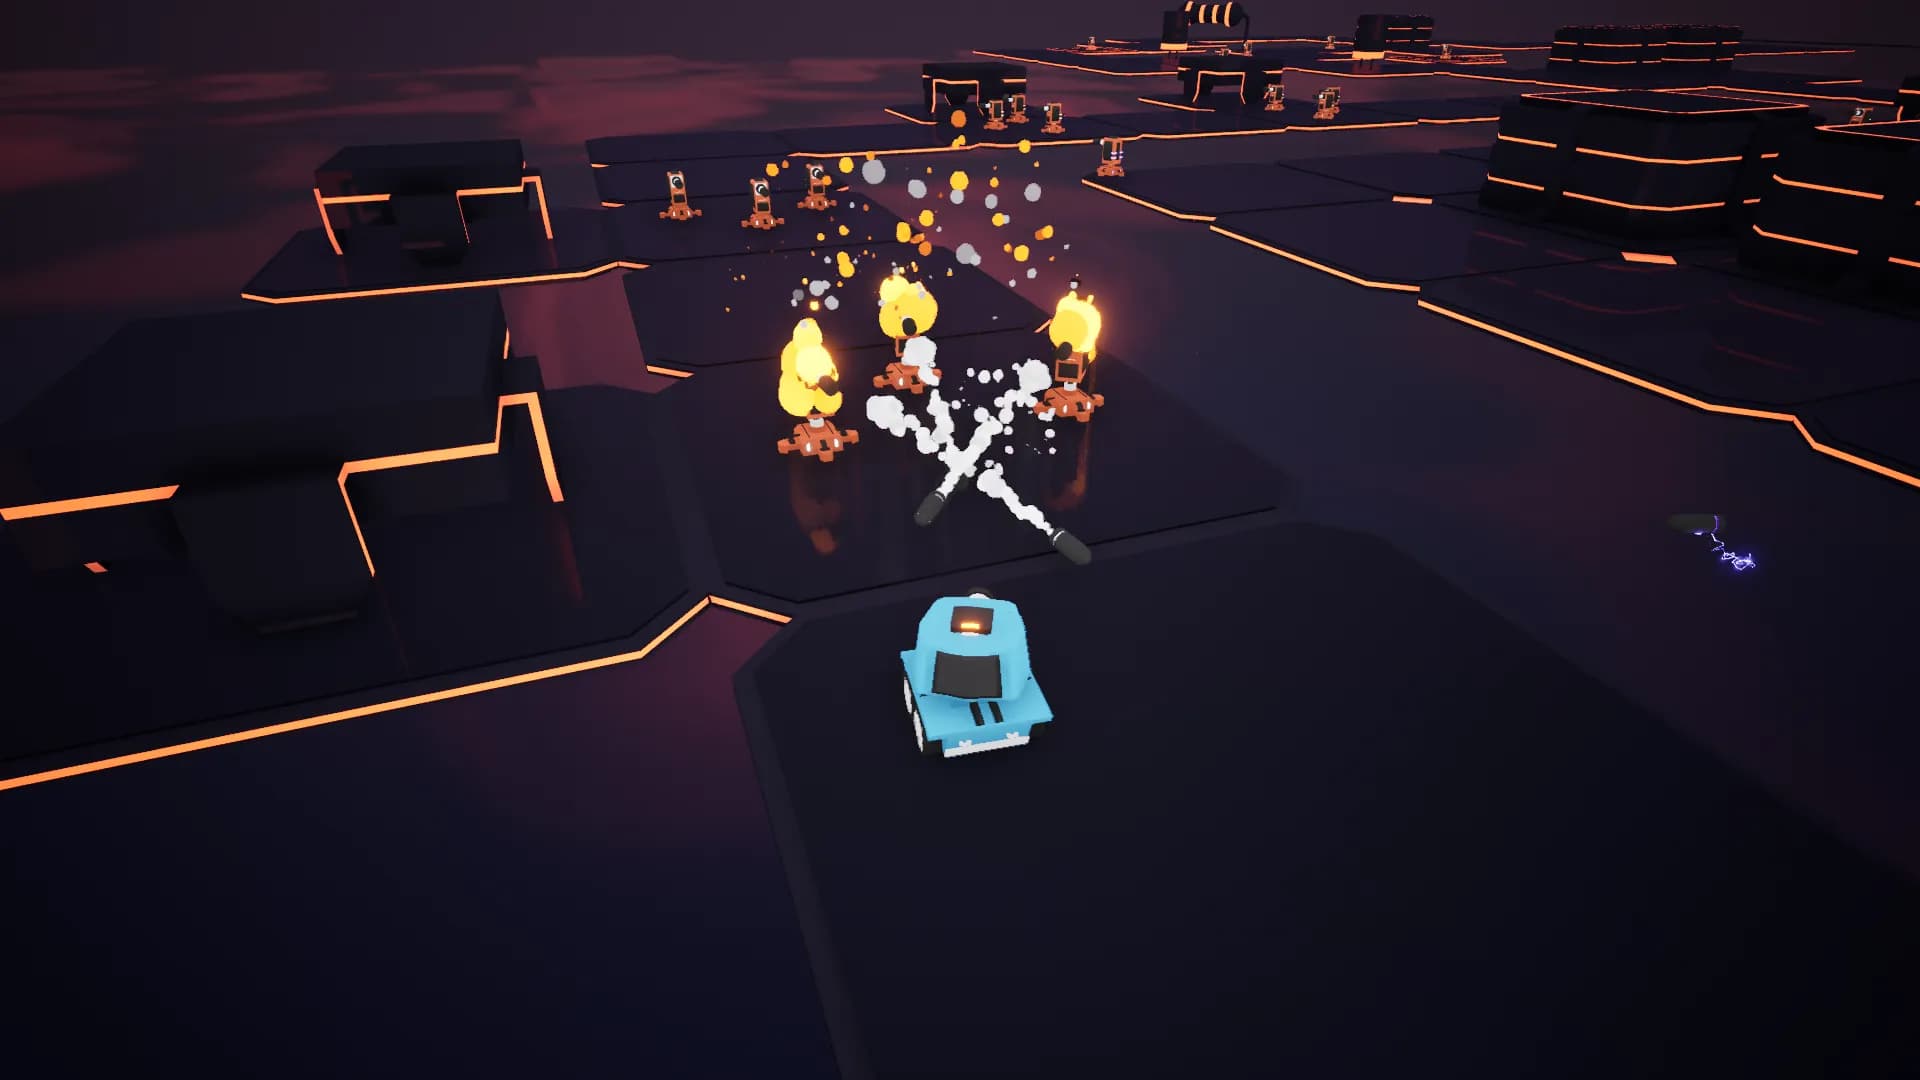 Screenshot 3: Tank dodging projectiles coming from towers on fire